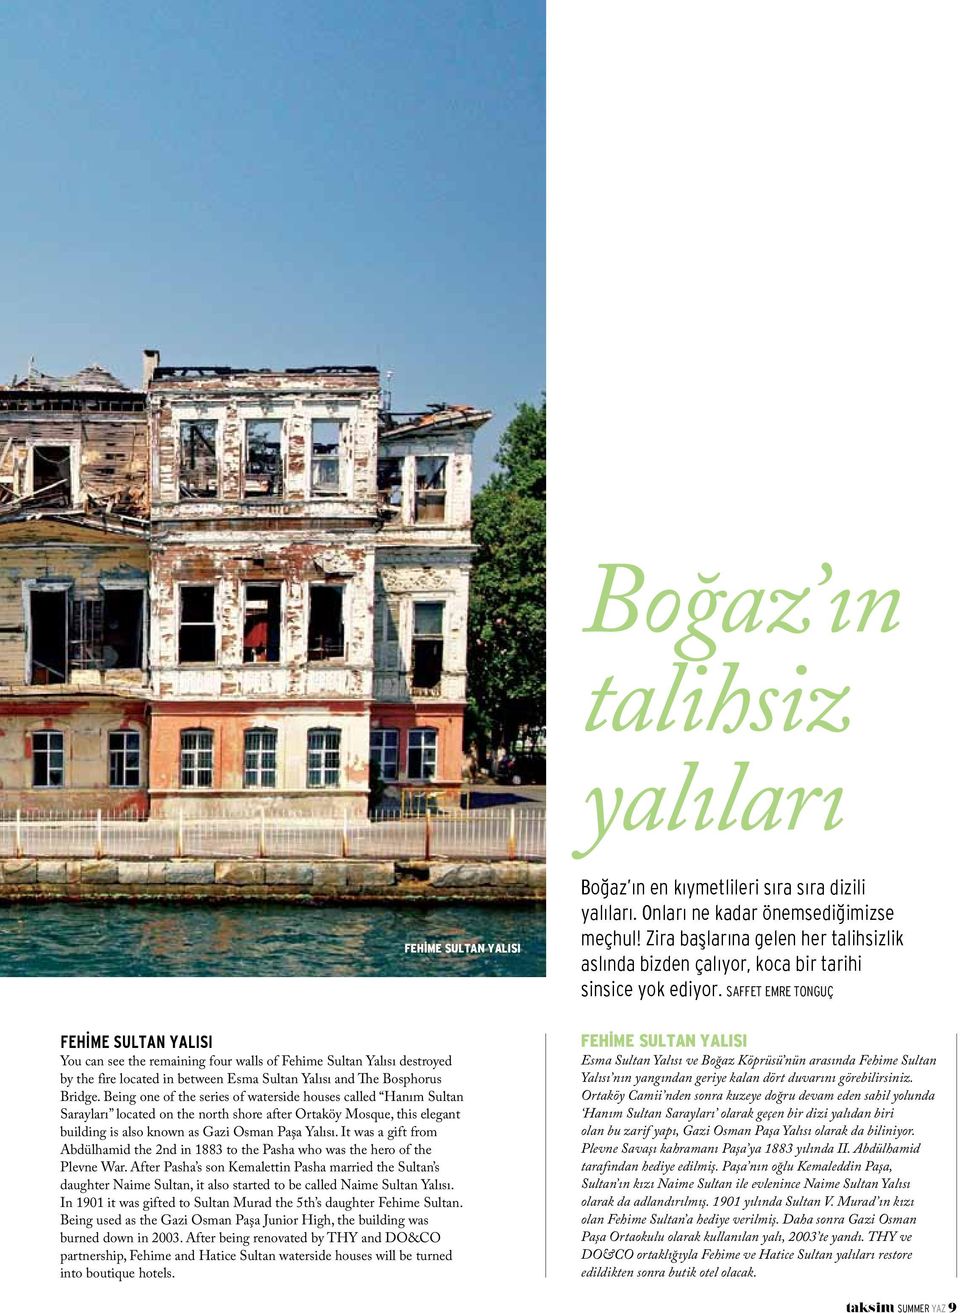 Being one of the series of waterside houses called Hanım Sultan Sarayları located on the north shore after Ortaköy Mosque, this elegant building is also known as Gazi Osman Paşa Yalısı.